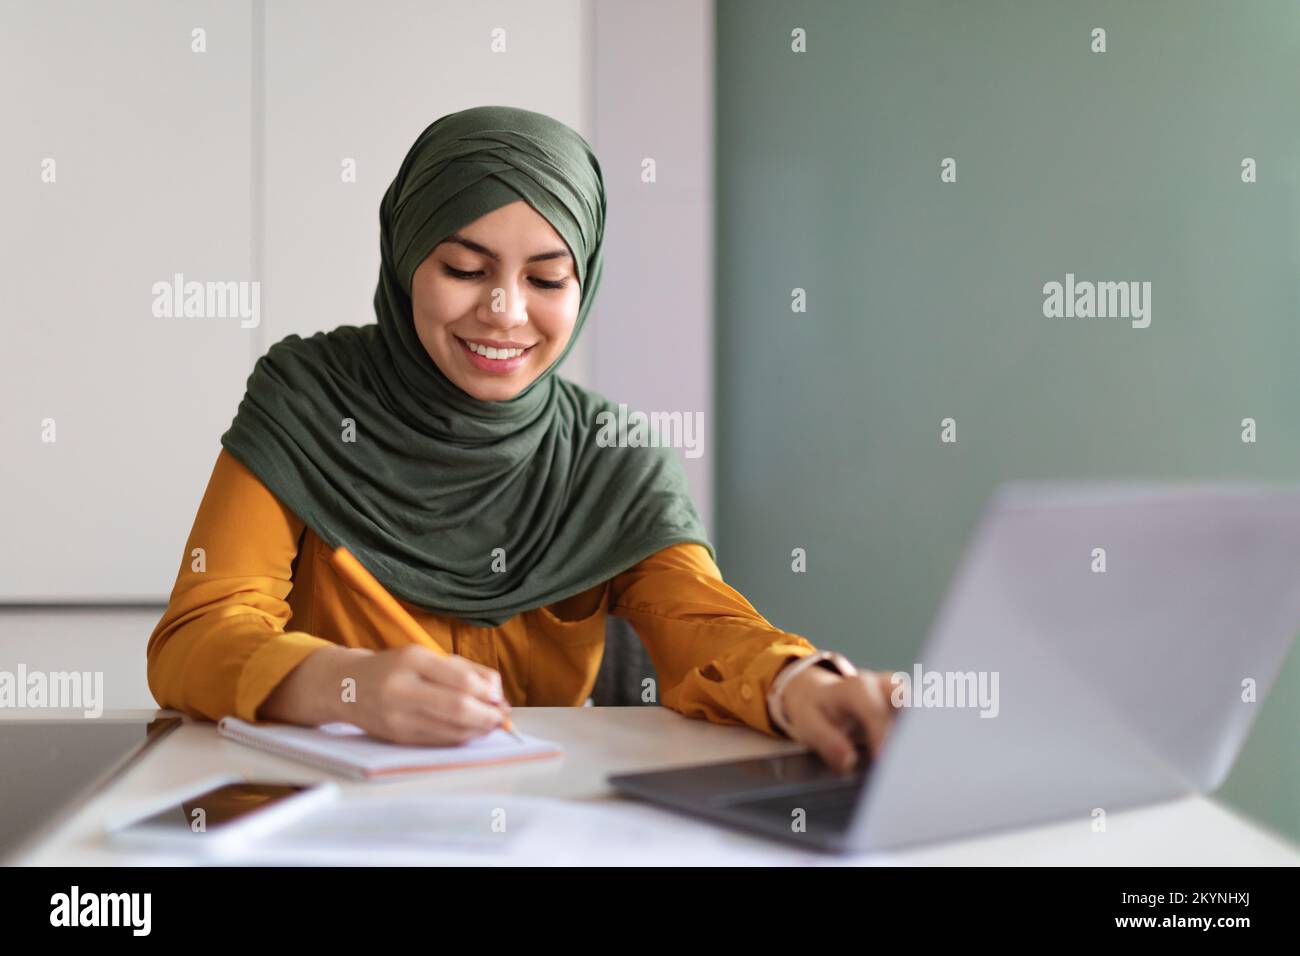 Online Education. Smiling Muslim Woman In Hijab Study With Laptop At Home Stock Photo